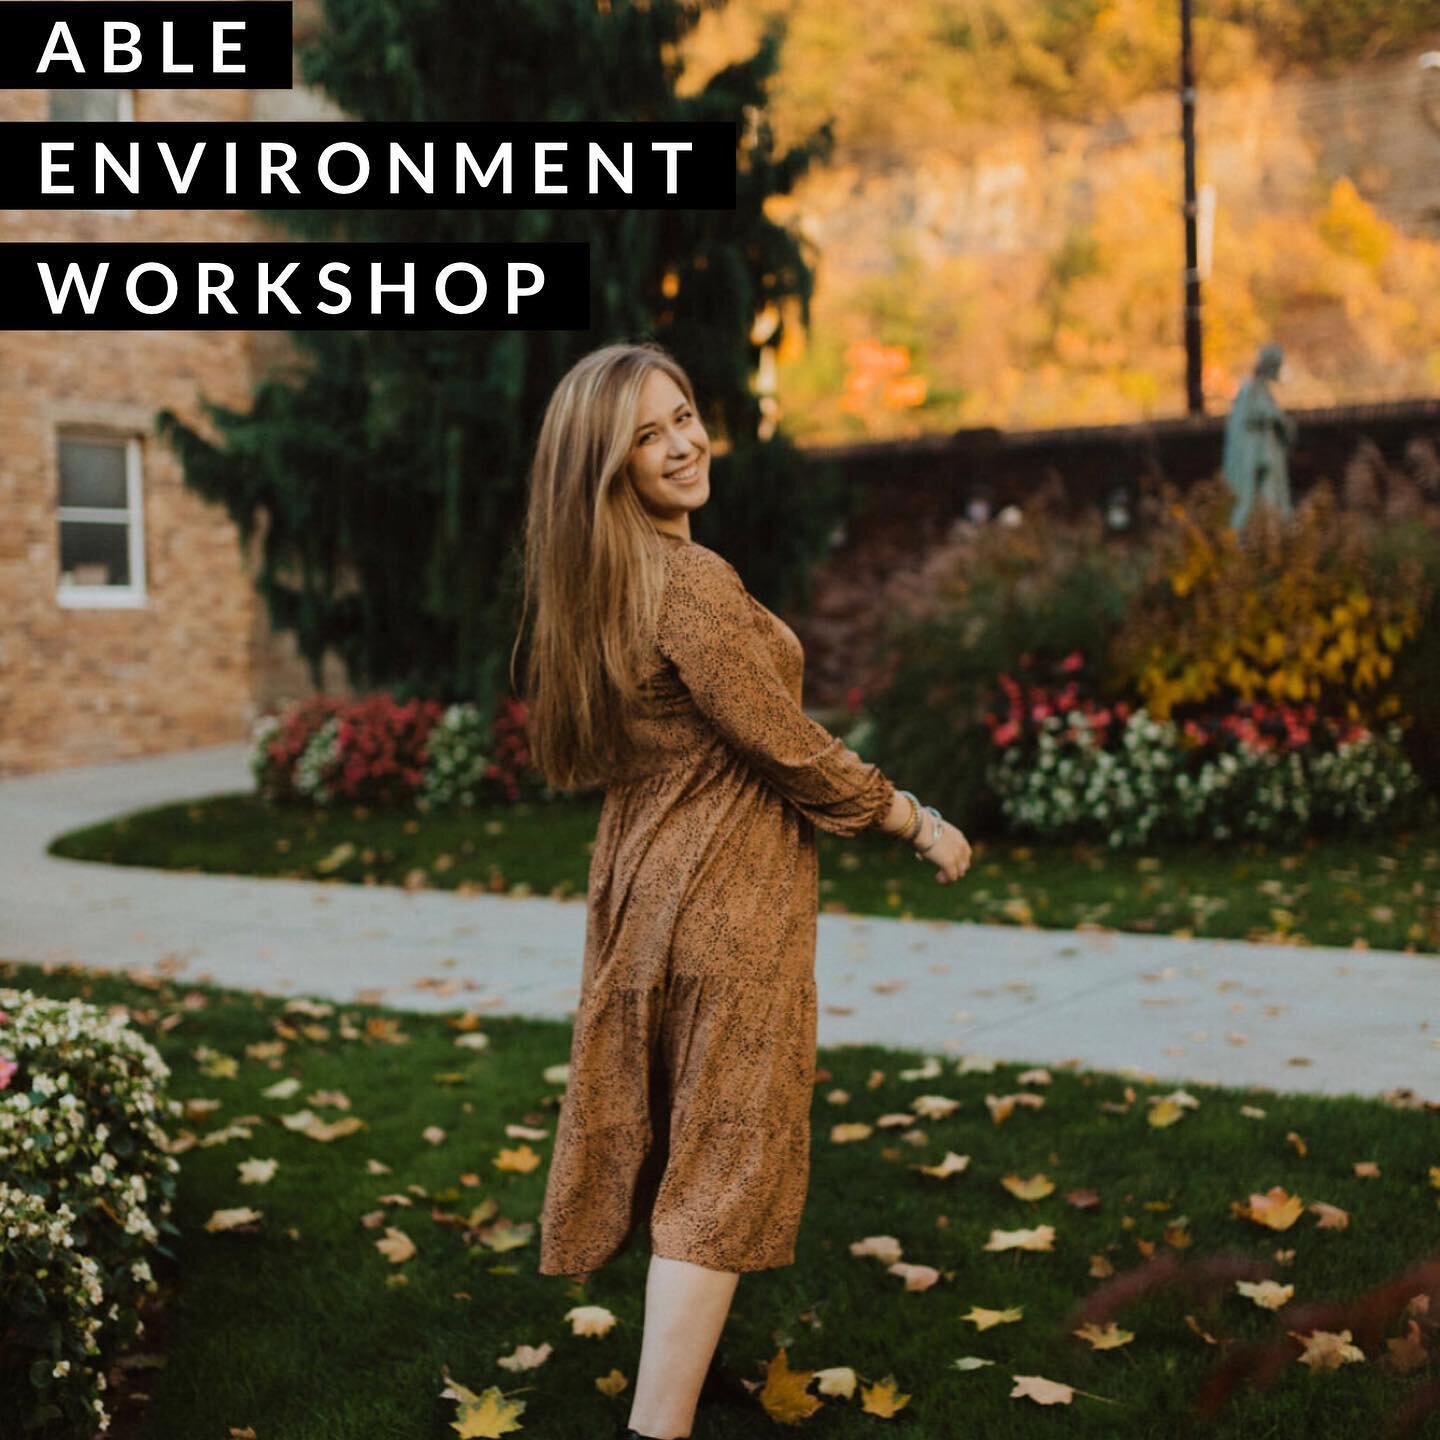 Kick back, relax, and join me at 8pm on Thursday, February 16th, for a virtual discussion on fostering an Able environment. Tickets can be purchased at the link in my bio, or if you are already a member of @gatherxgrowco , the event is free! 
.
Armor